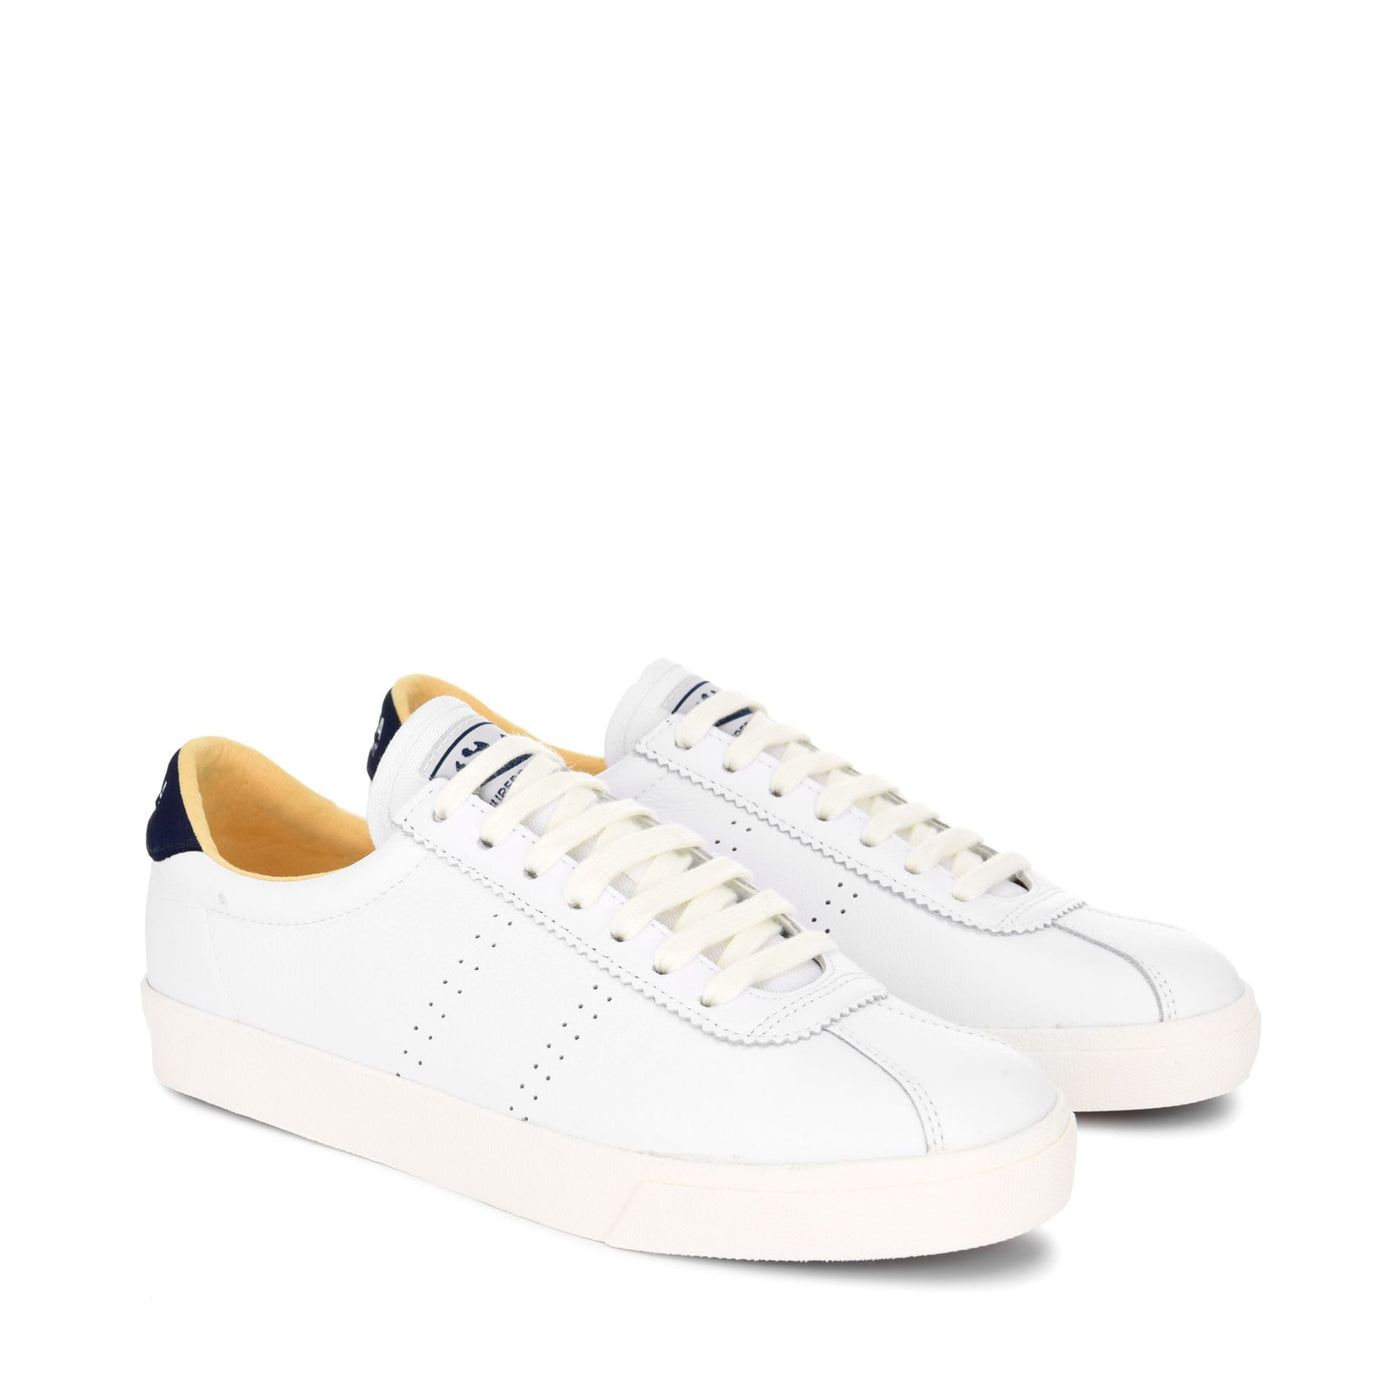 Sneakers Unisex 2843 CLUB S COMFORT LEATHER Low Cut BLUE NAVY-BEIGE GOME Dressed Front (jpg Rgb)	